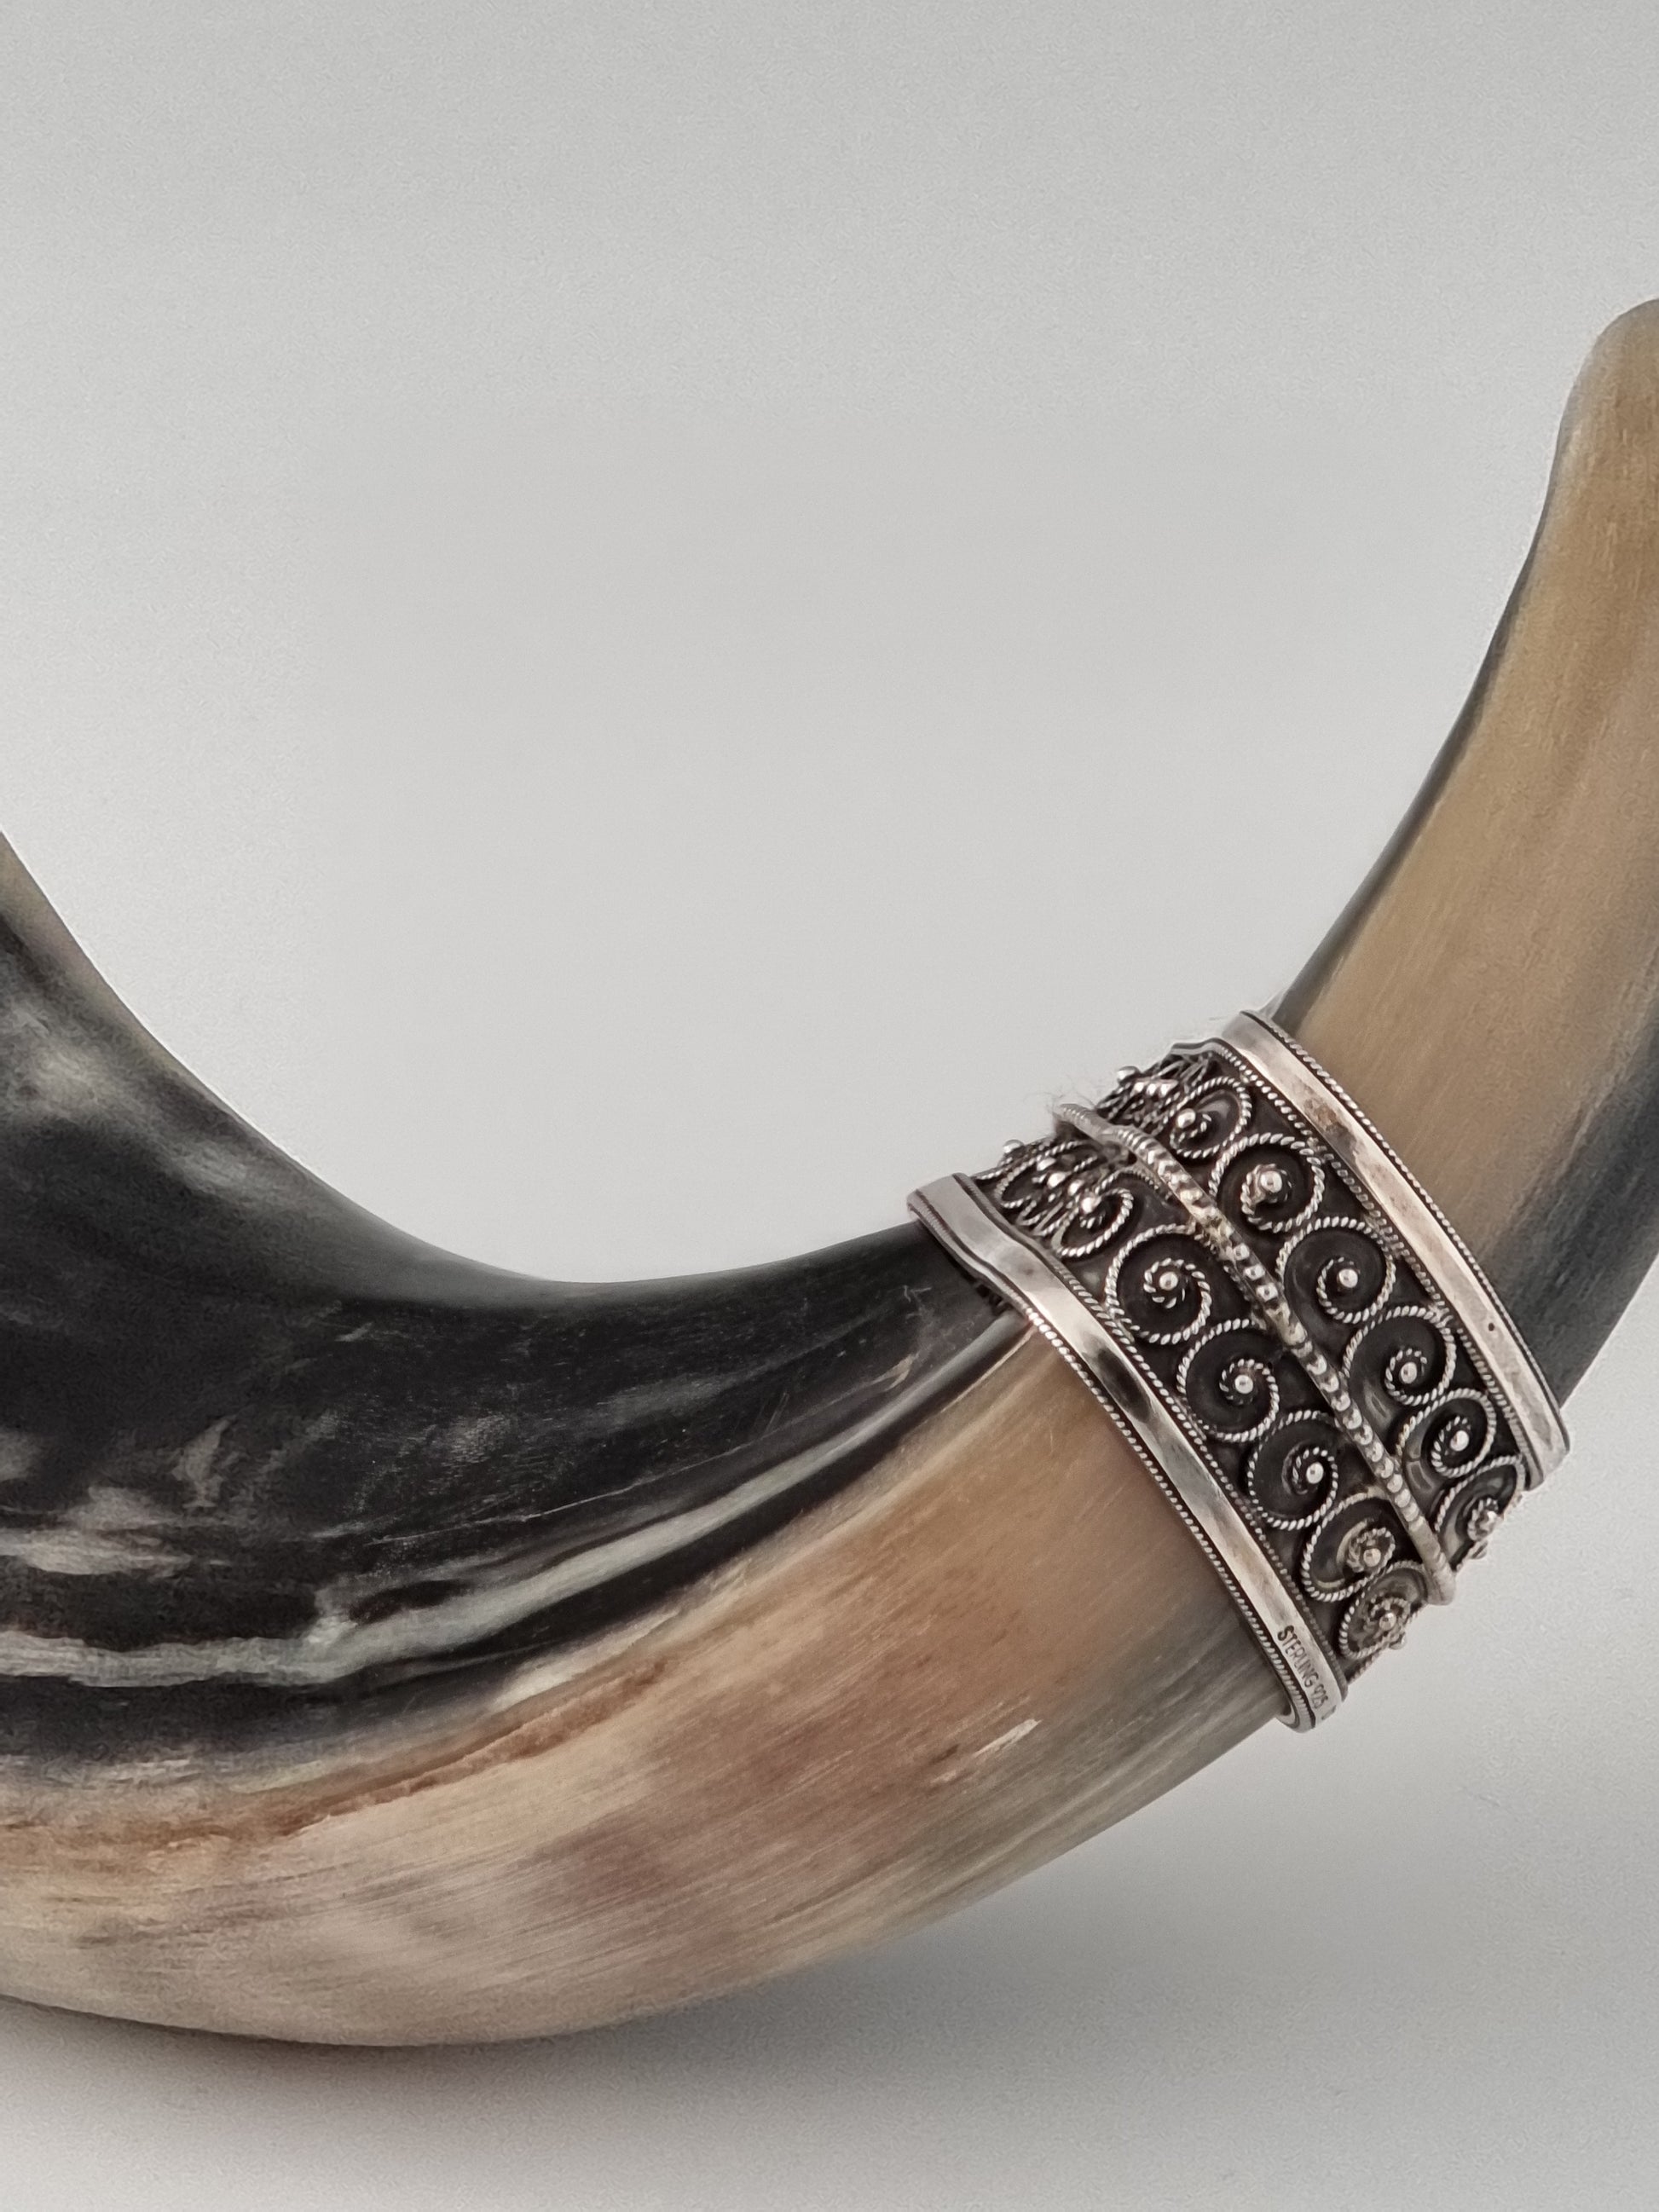 Silver band perfectly fitted on a black Shofar